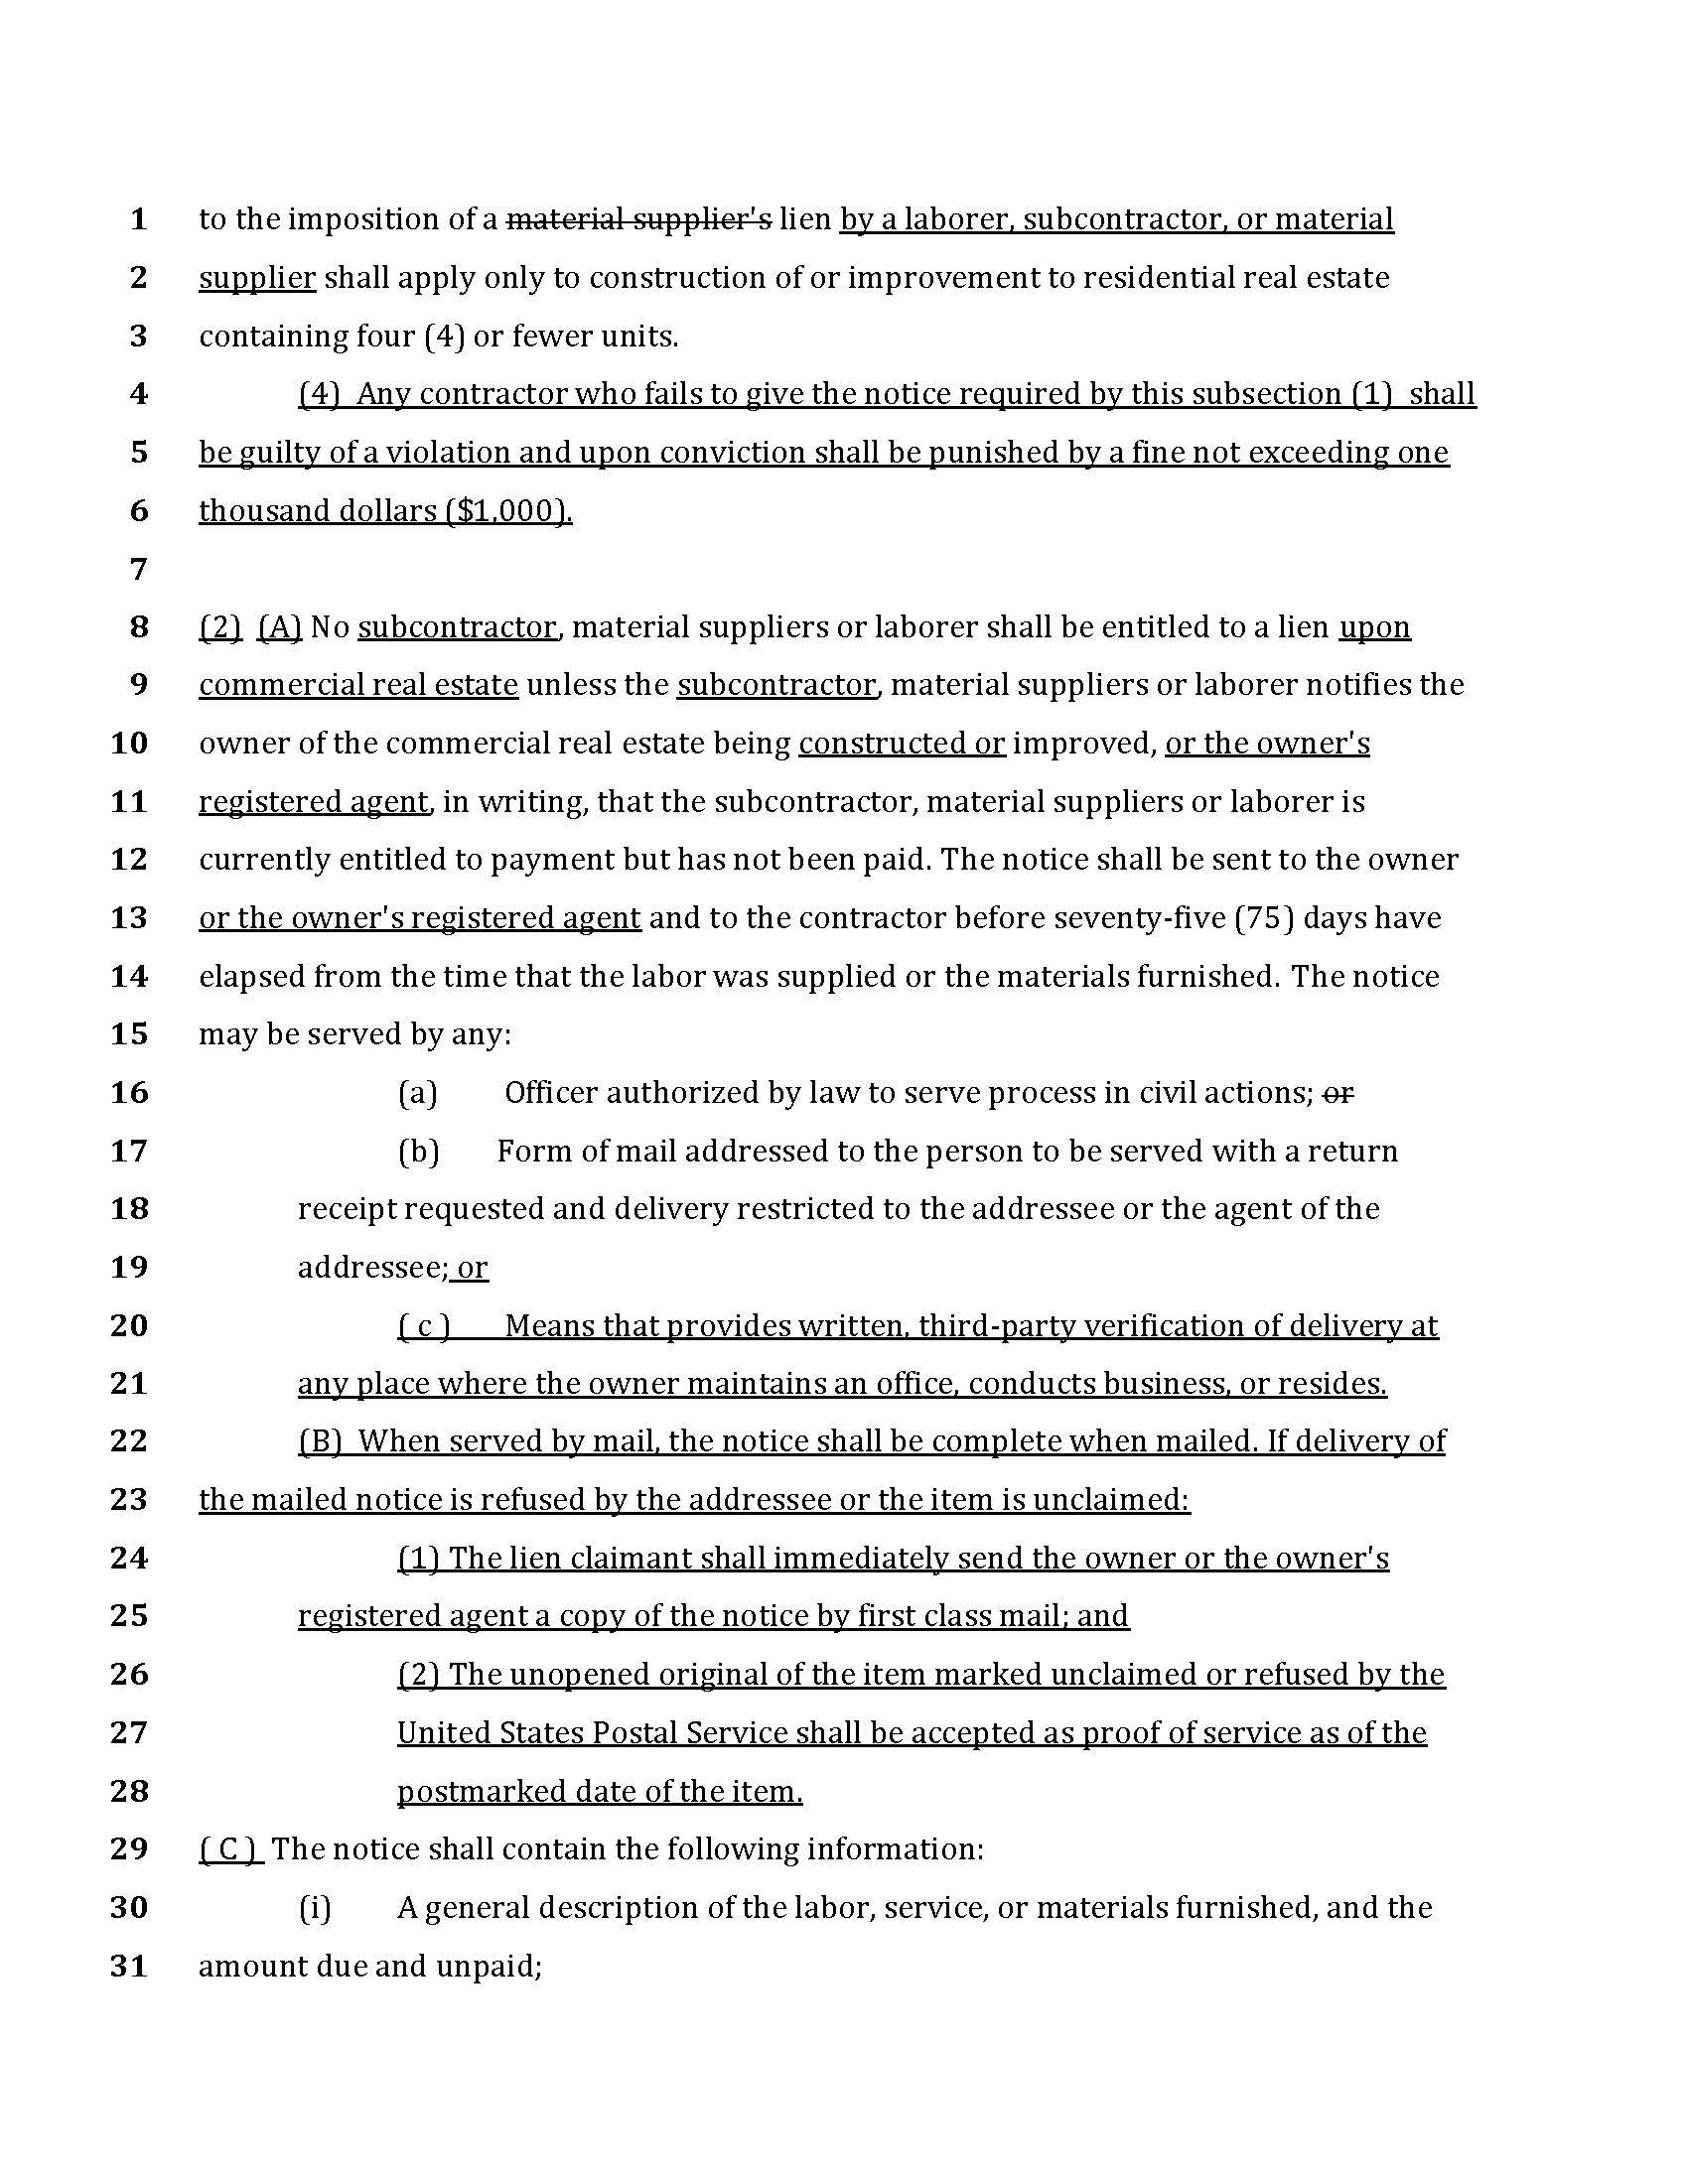 final-bill-lien-law-revisions_Page_08.jpg